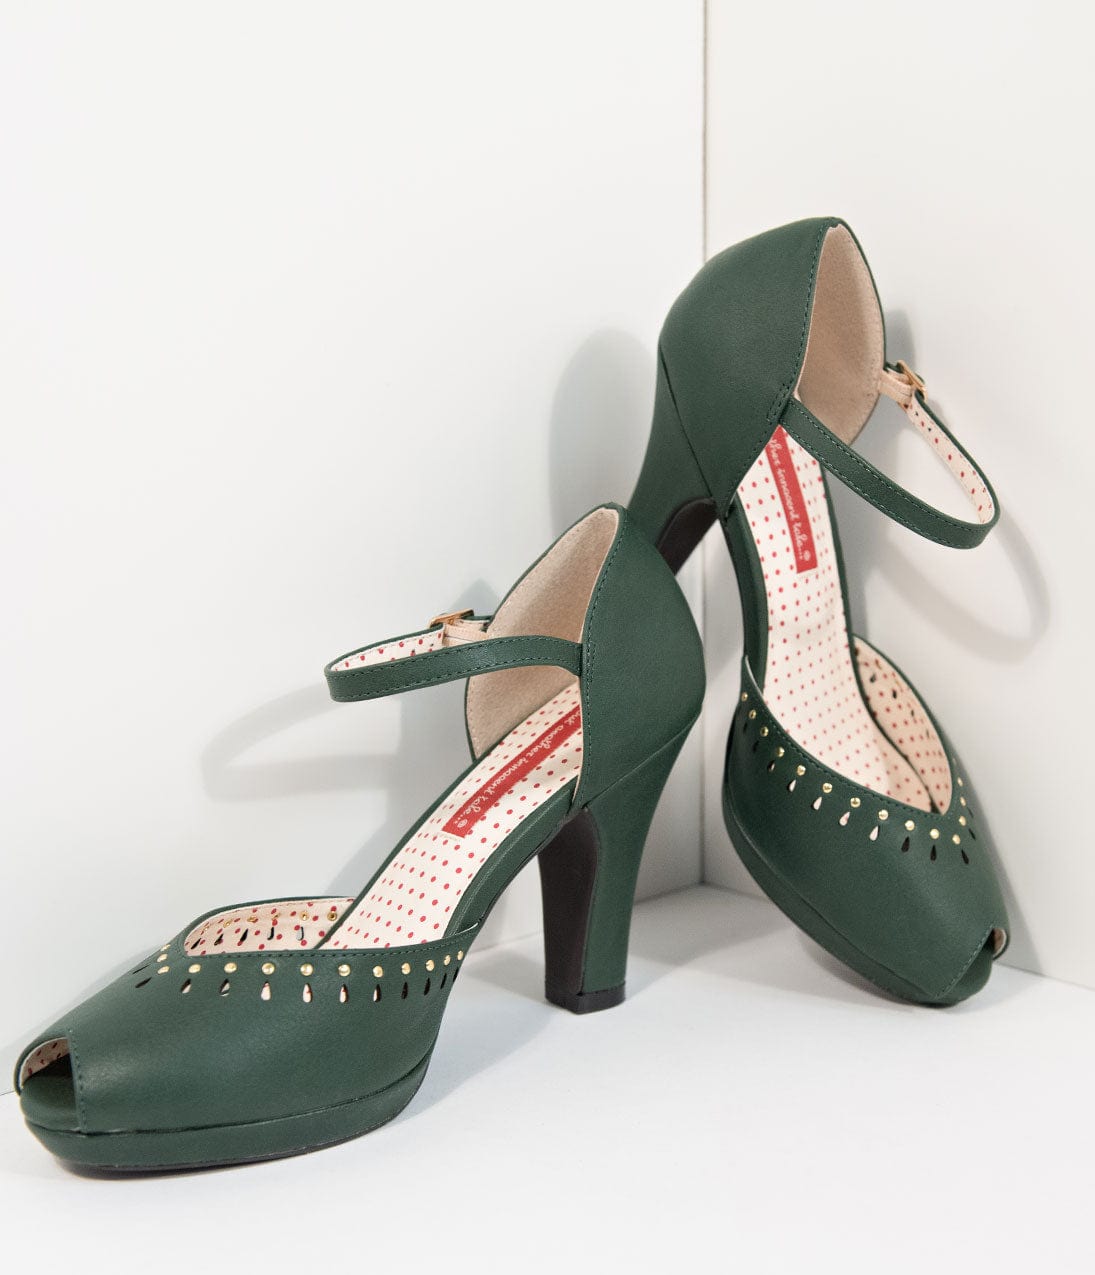 Vintage Style Shoes, Vintage Inspired Shoes